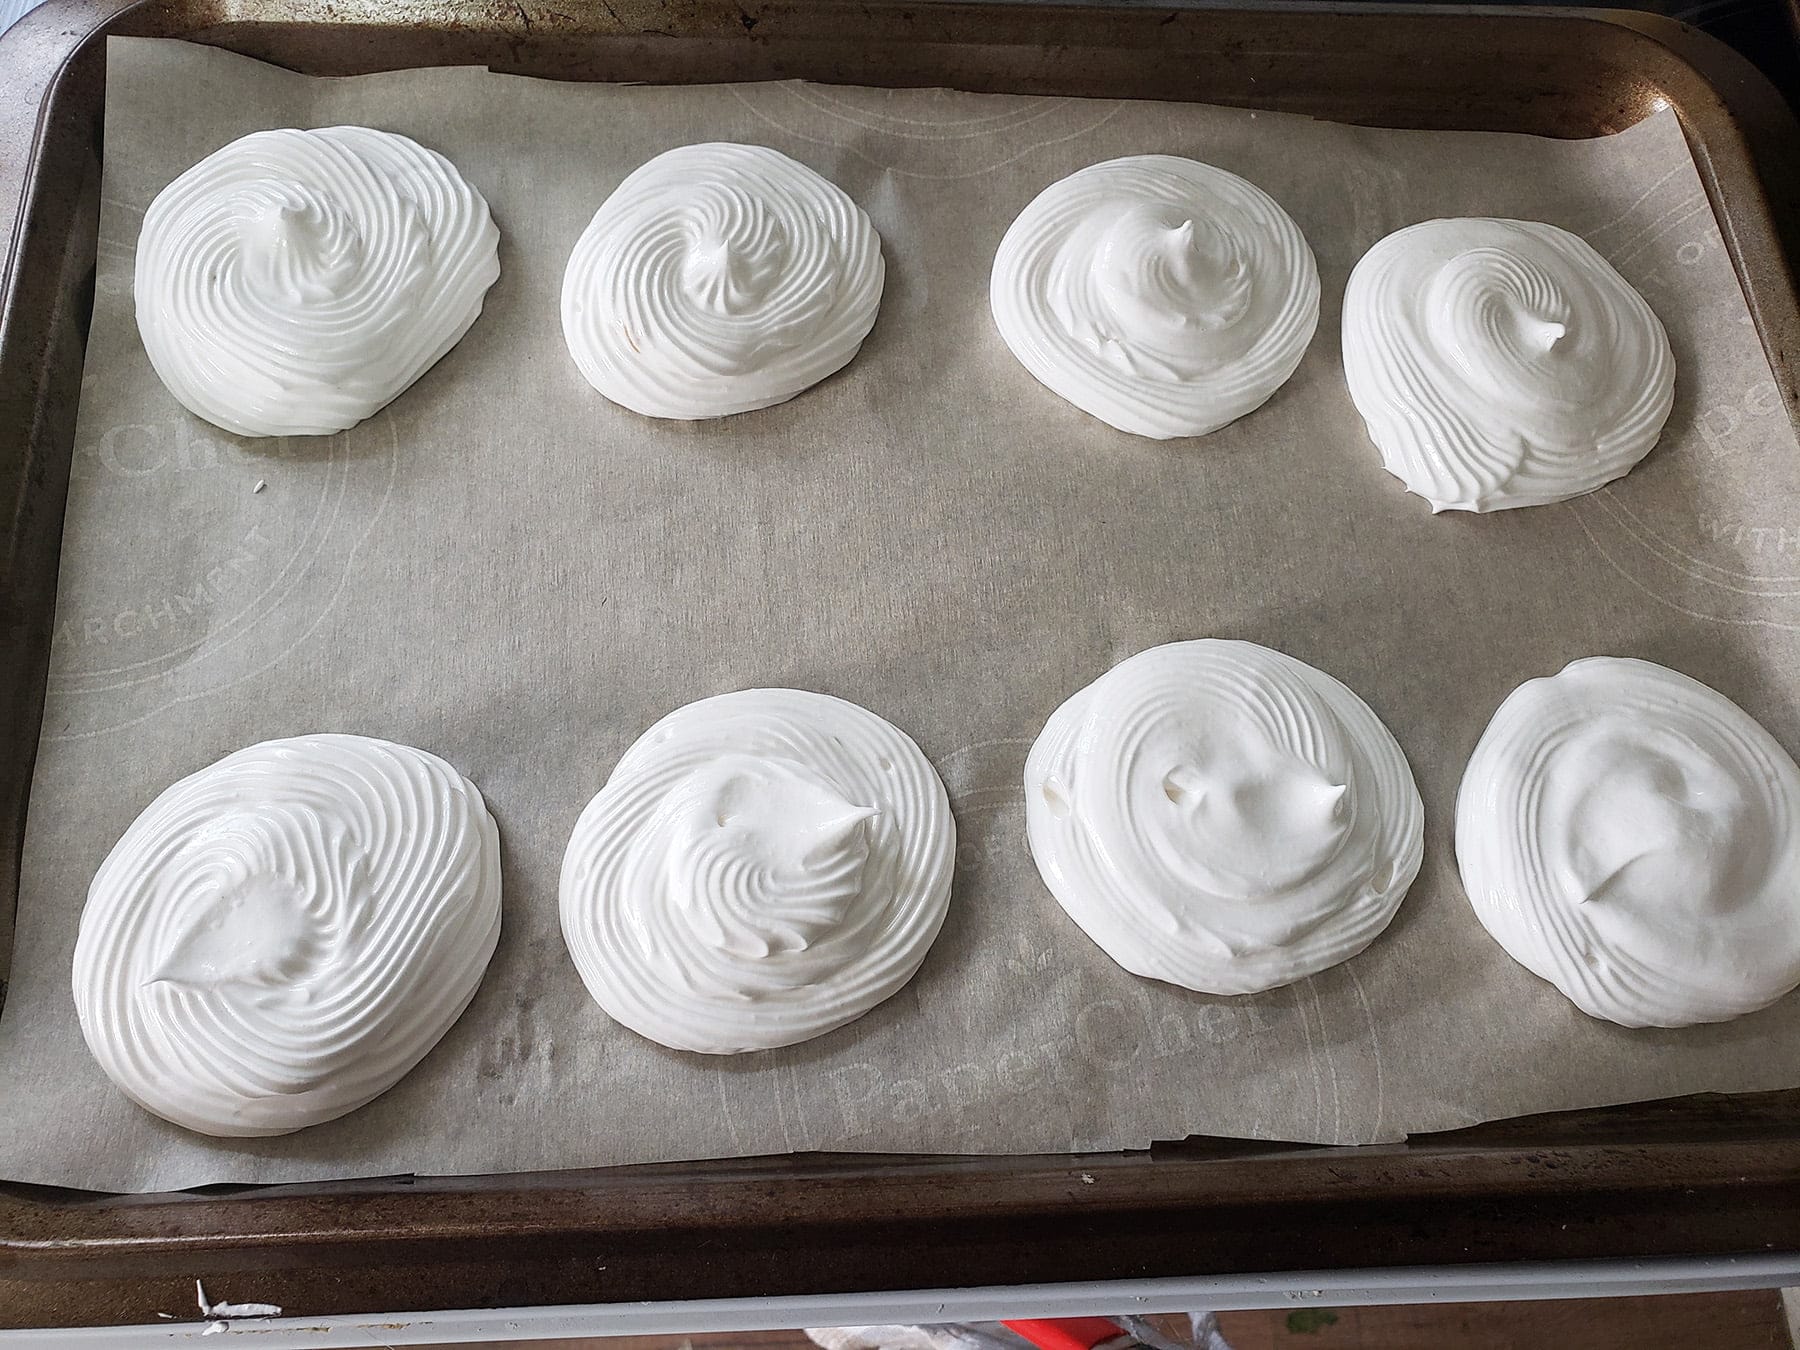 8 small meringues, piped onto a parchment lined baking sheet.